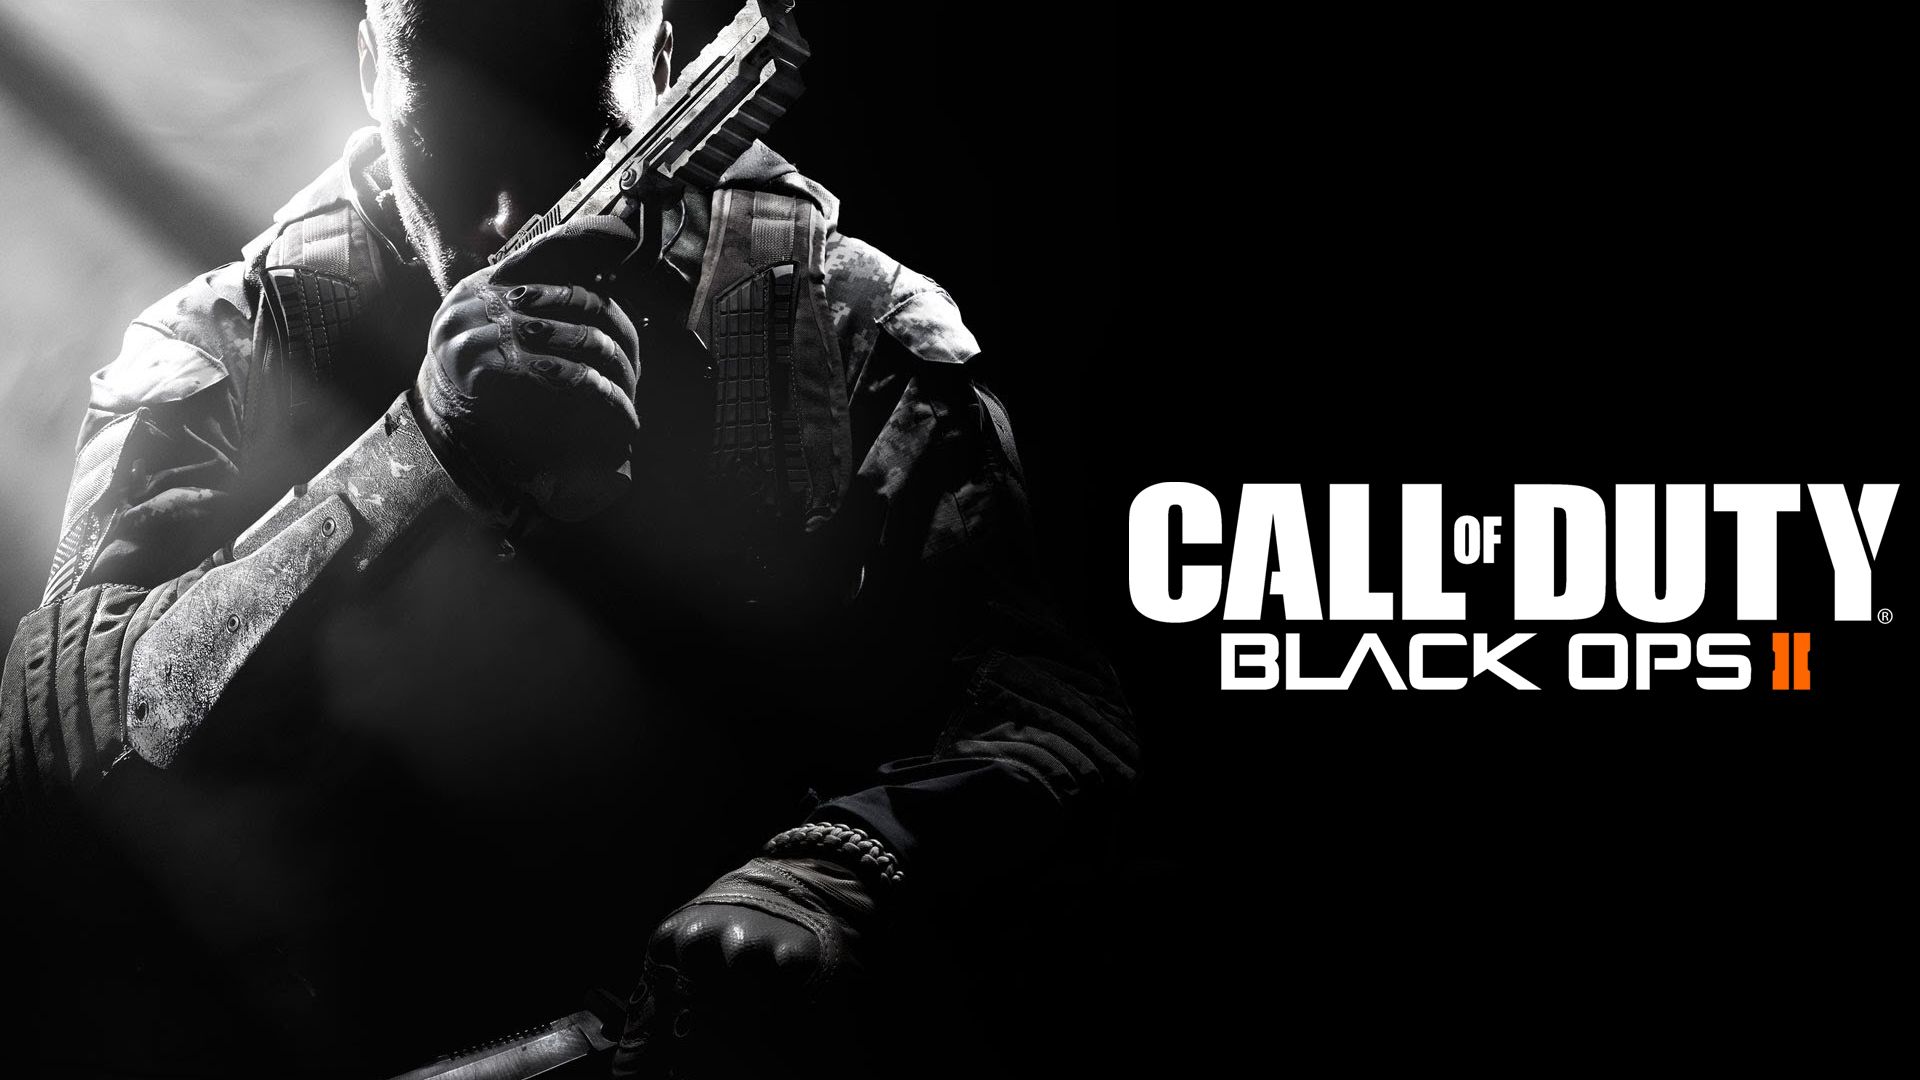 Call of duty black ops 2 crack file free download for pc